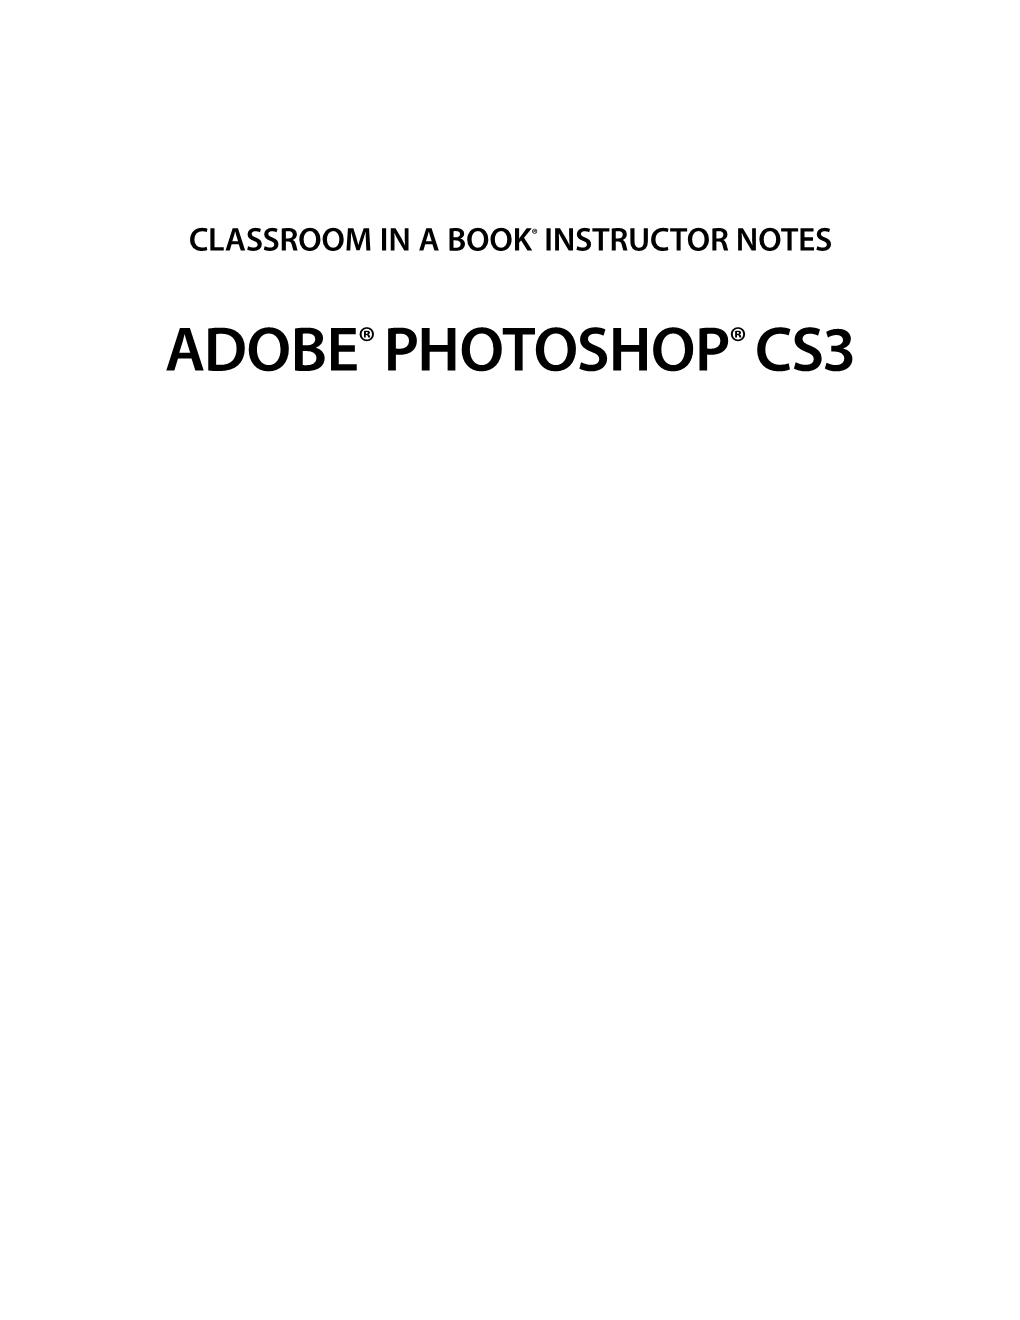 Adobe Photoshop CS3 Classroom in a Book Instructor Notes